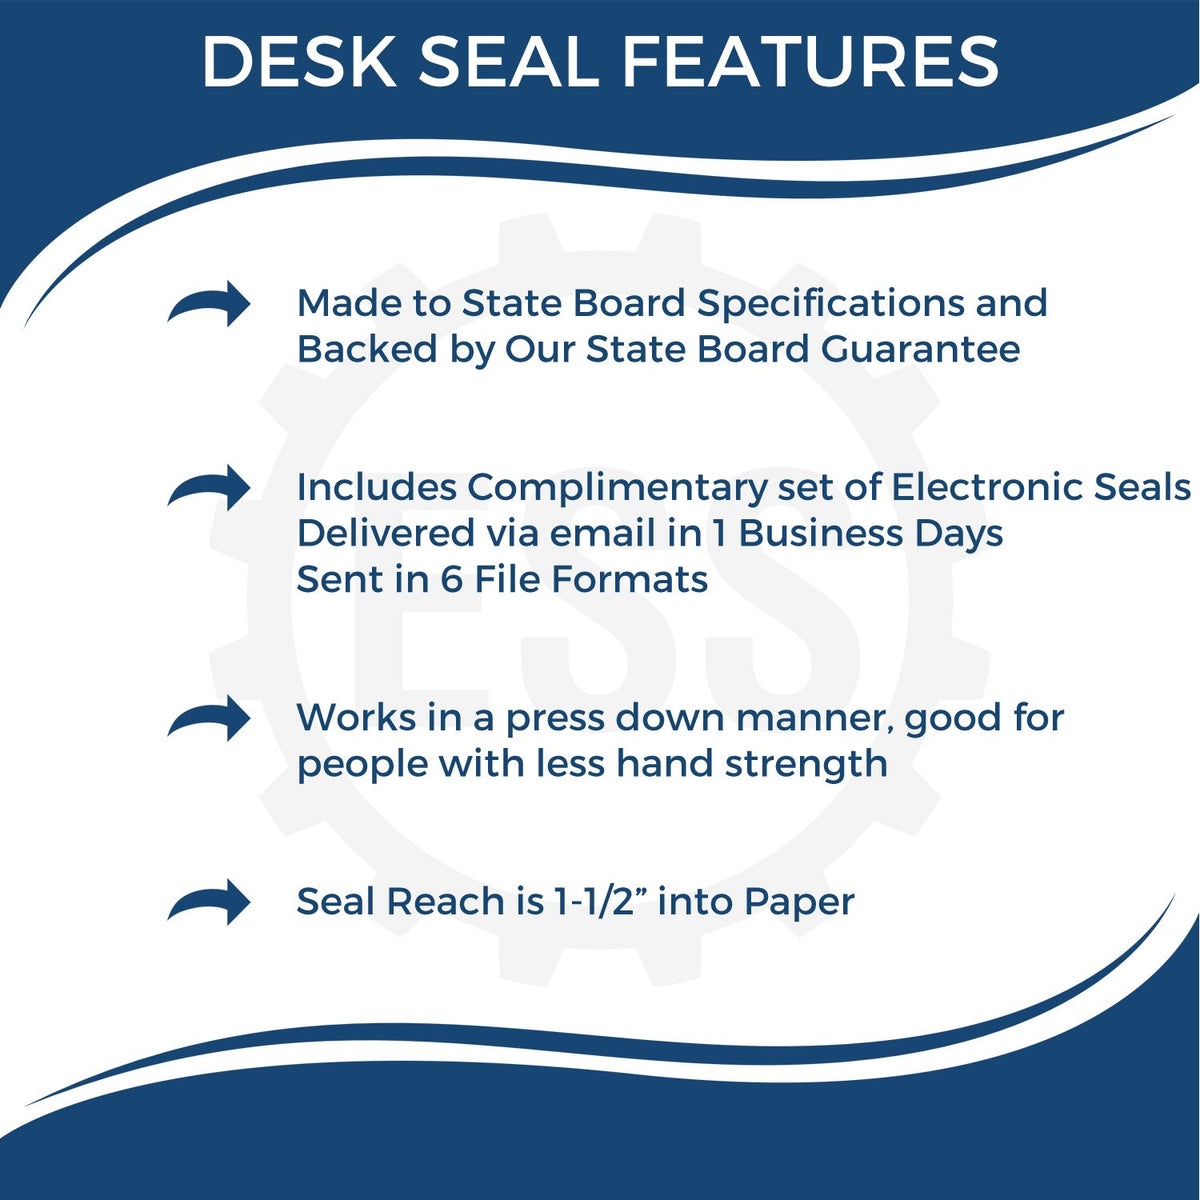 A picture of an infographic highlighting the selling points for the Hawaii Desk Architect Embossing Seal